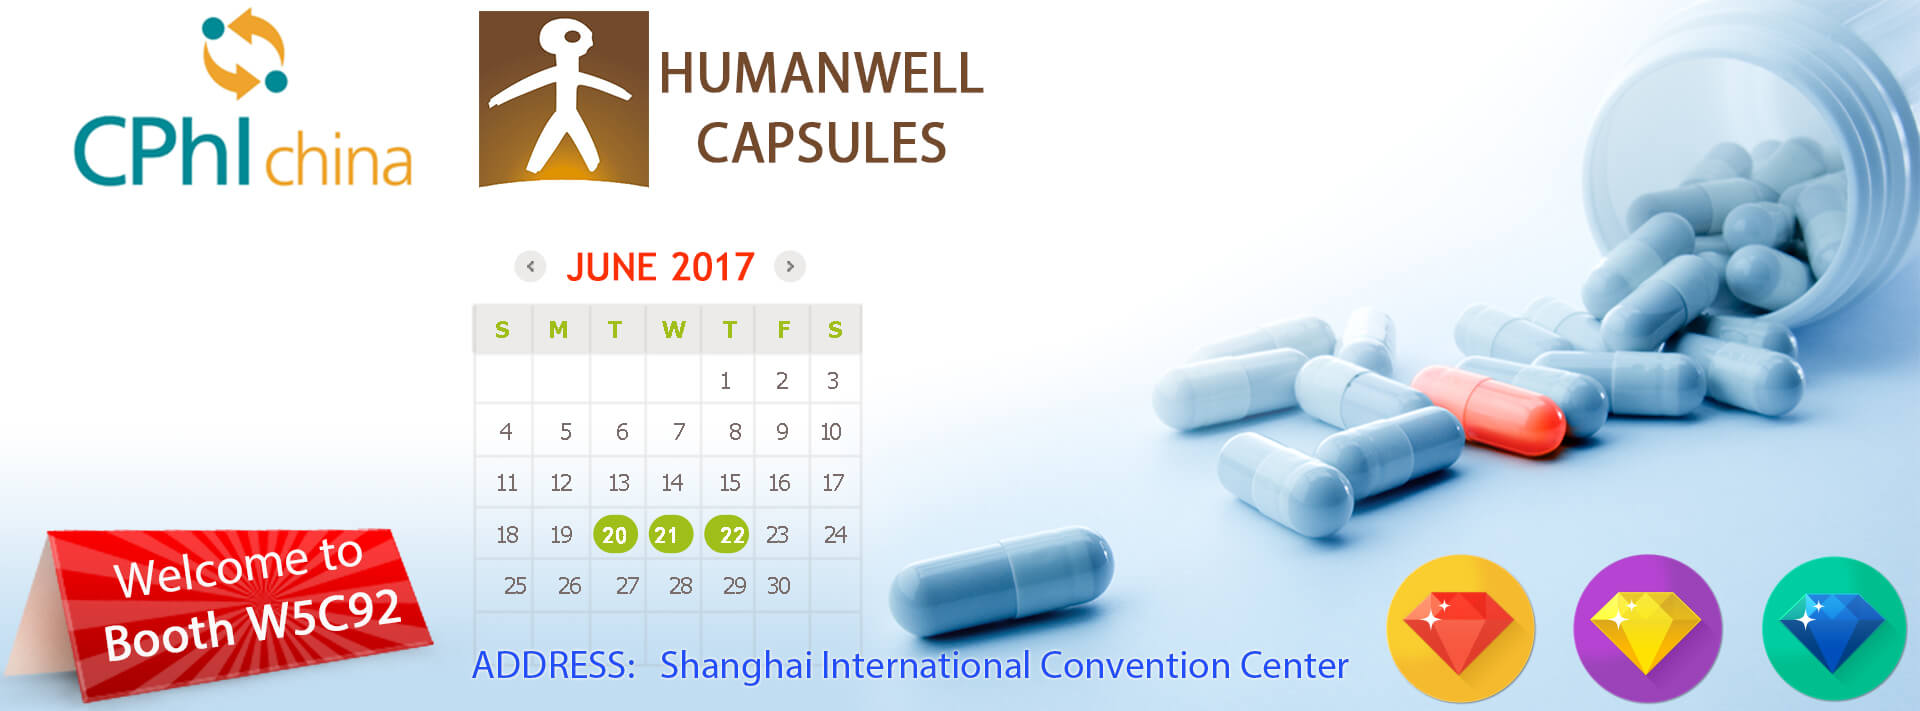 Warmly welcome to visit us on Shanghai 2017 CPHI